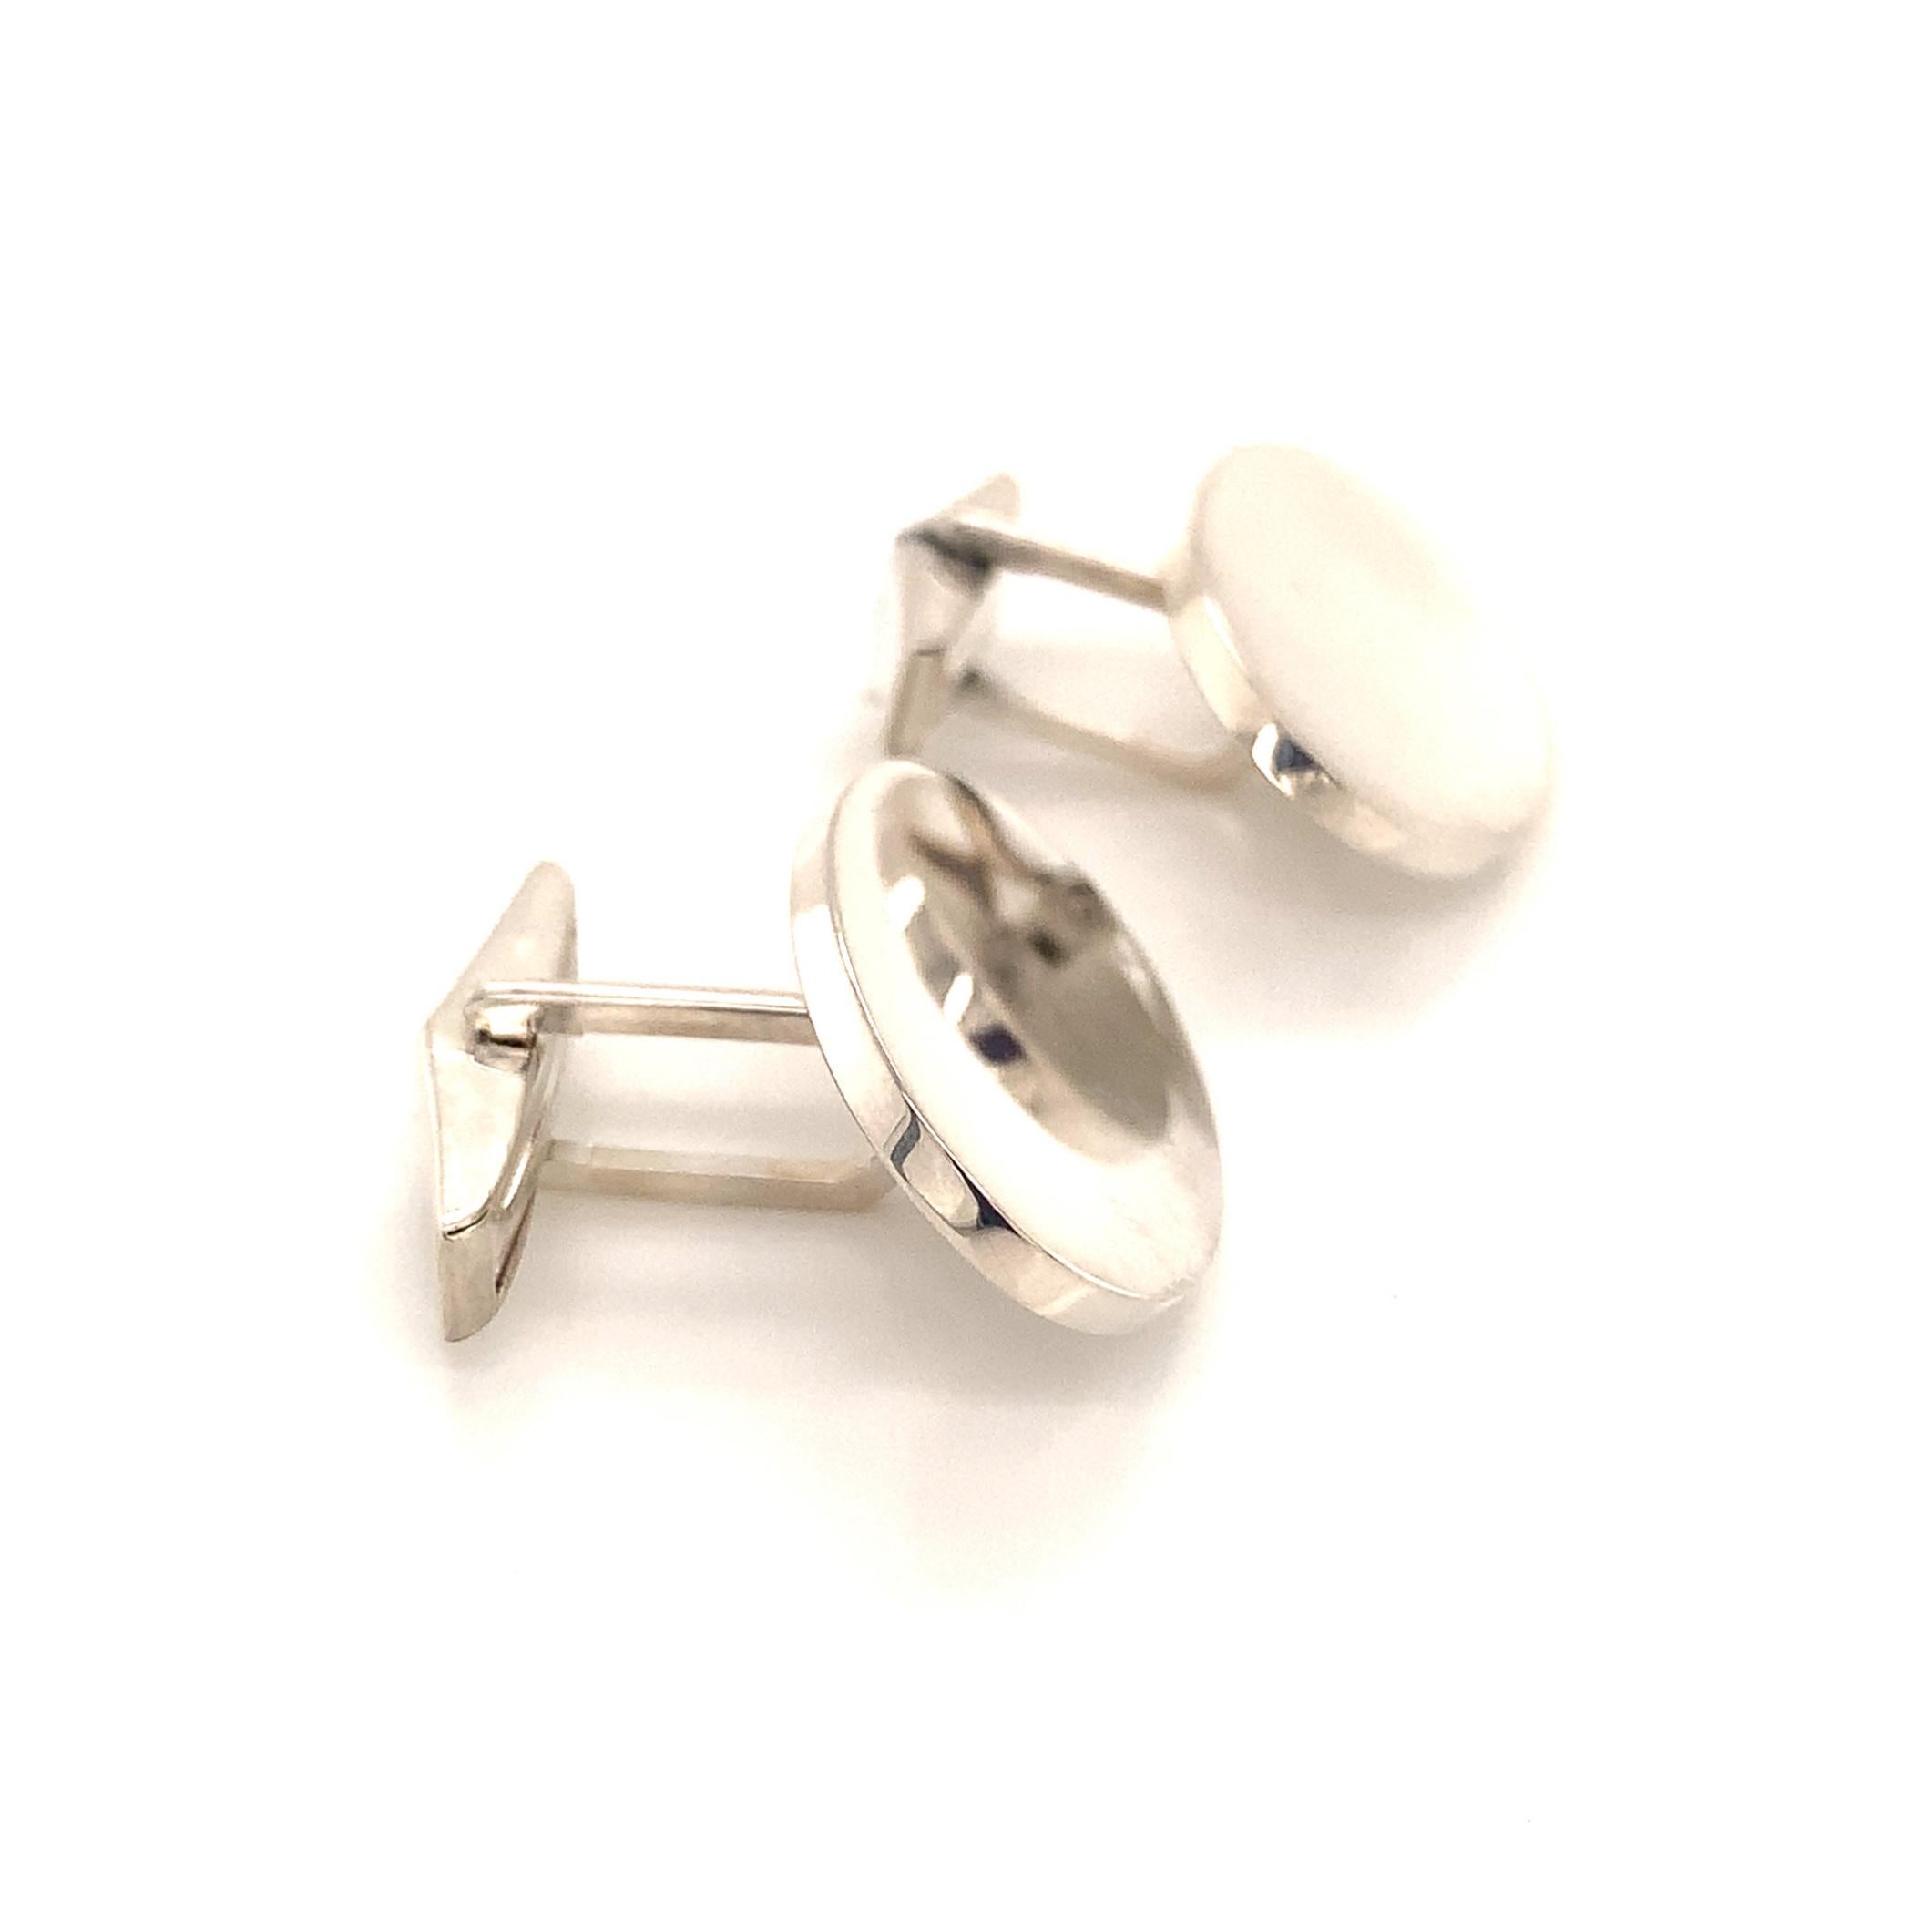 Tiffany & Co Estate Sterling Silver Extra Wide Oval Cufflinks 18 Grams TIF122
 
These elegant Authentic Tiffany & Co Men's Cufflinks are made of sterling silver and have a weight of 18 grams.

TRUSTED SELLER SINCE 2002
 
PLEASE SEE OUR HUNDREDS OF